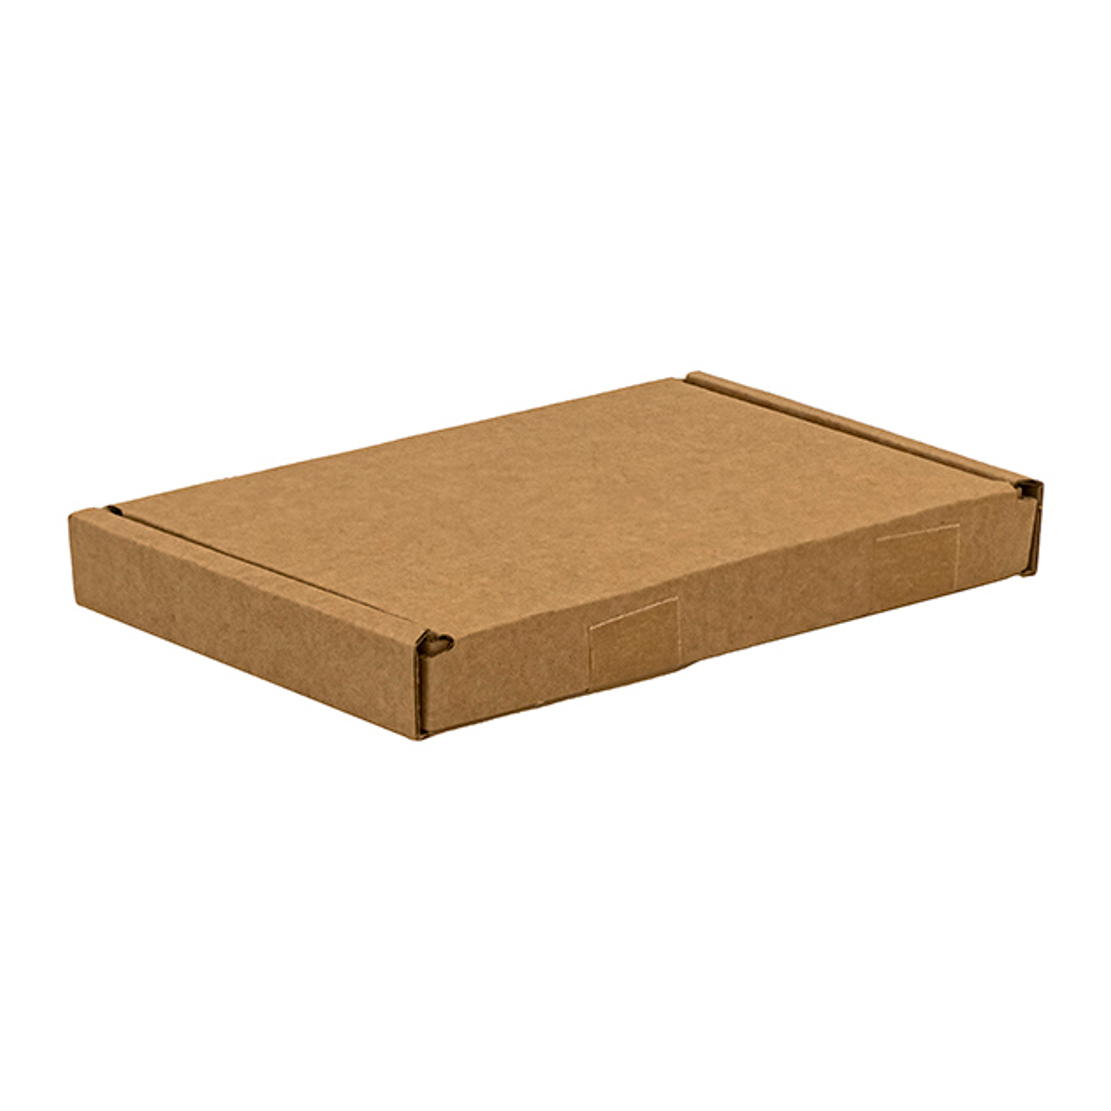 Royal Mail Large Letter Packing Boxes C6 (Pack of 25)